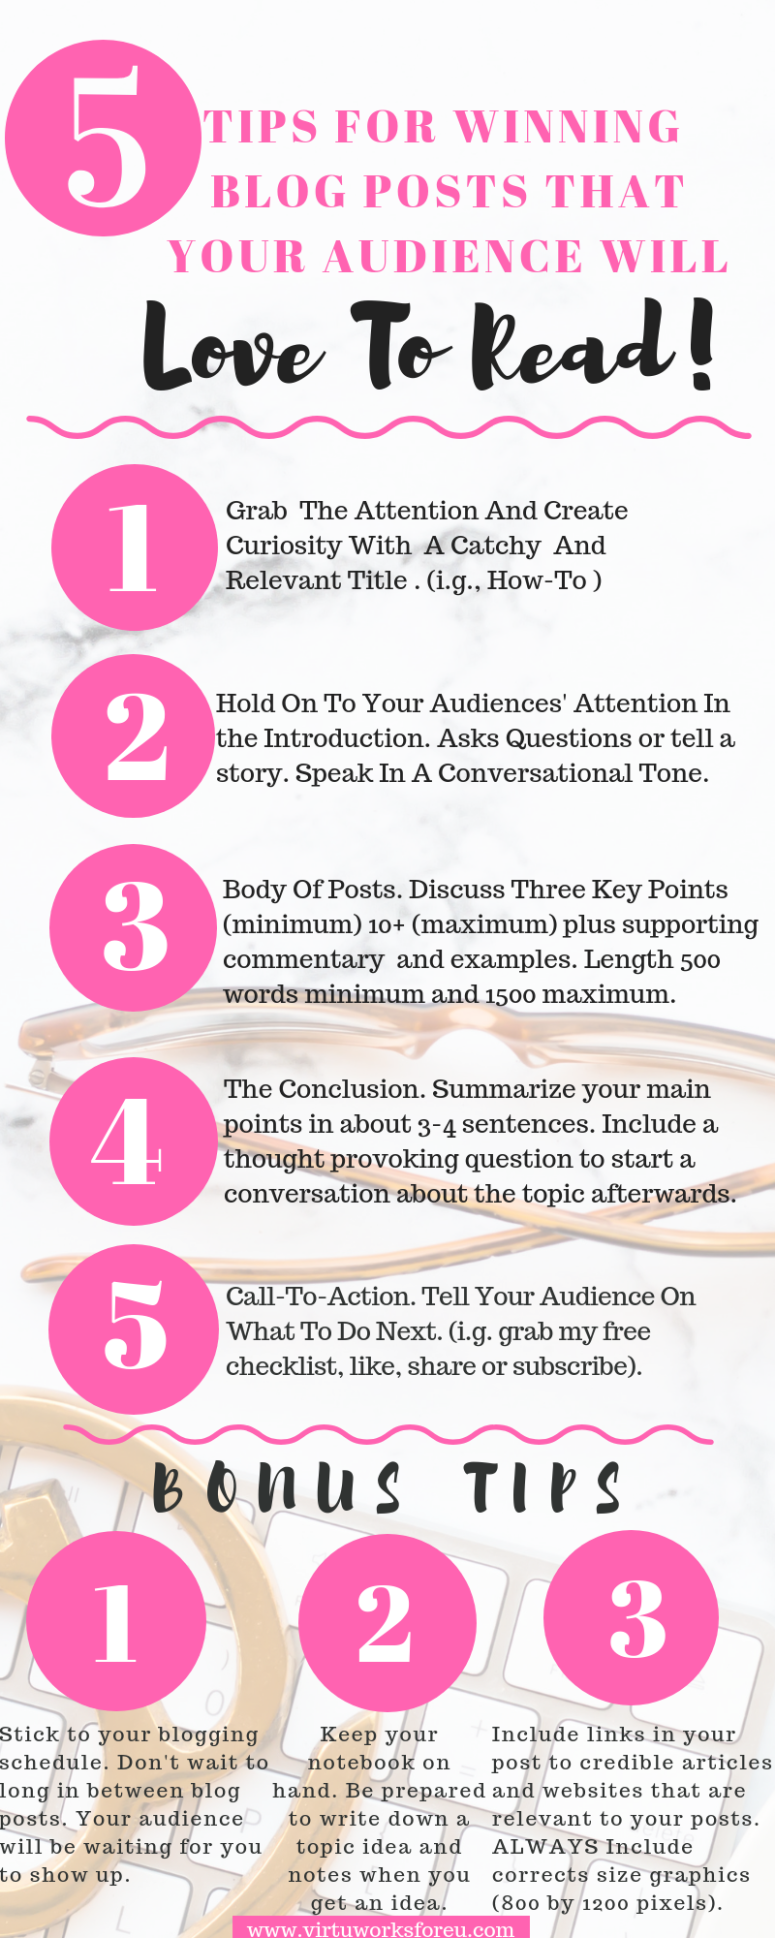 tips-for-a-winning-blog-posts-that-your-audience-will-love-to-read-infographic